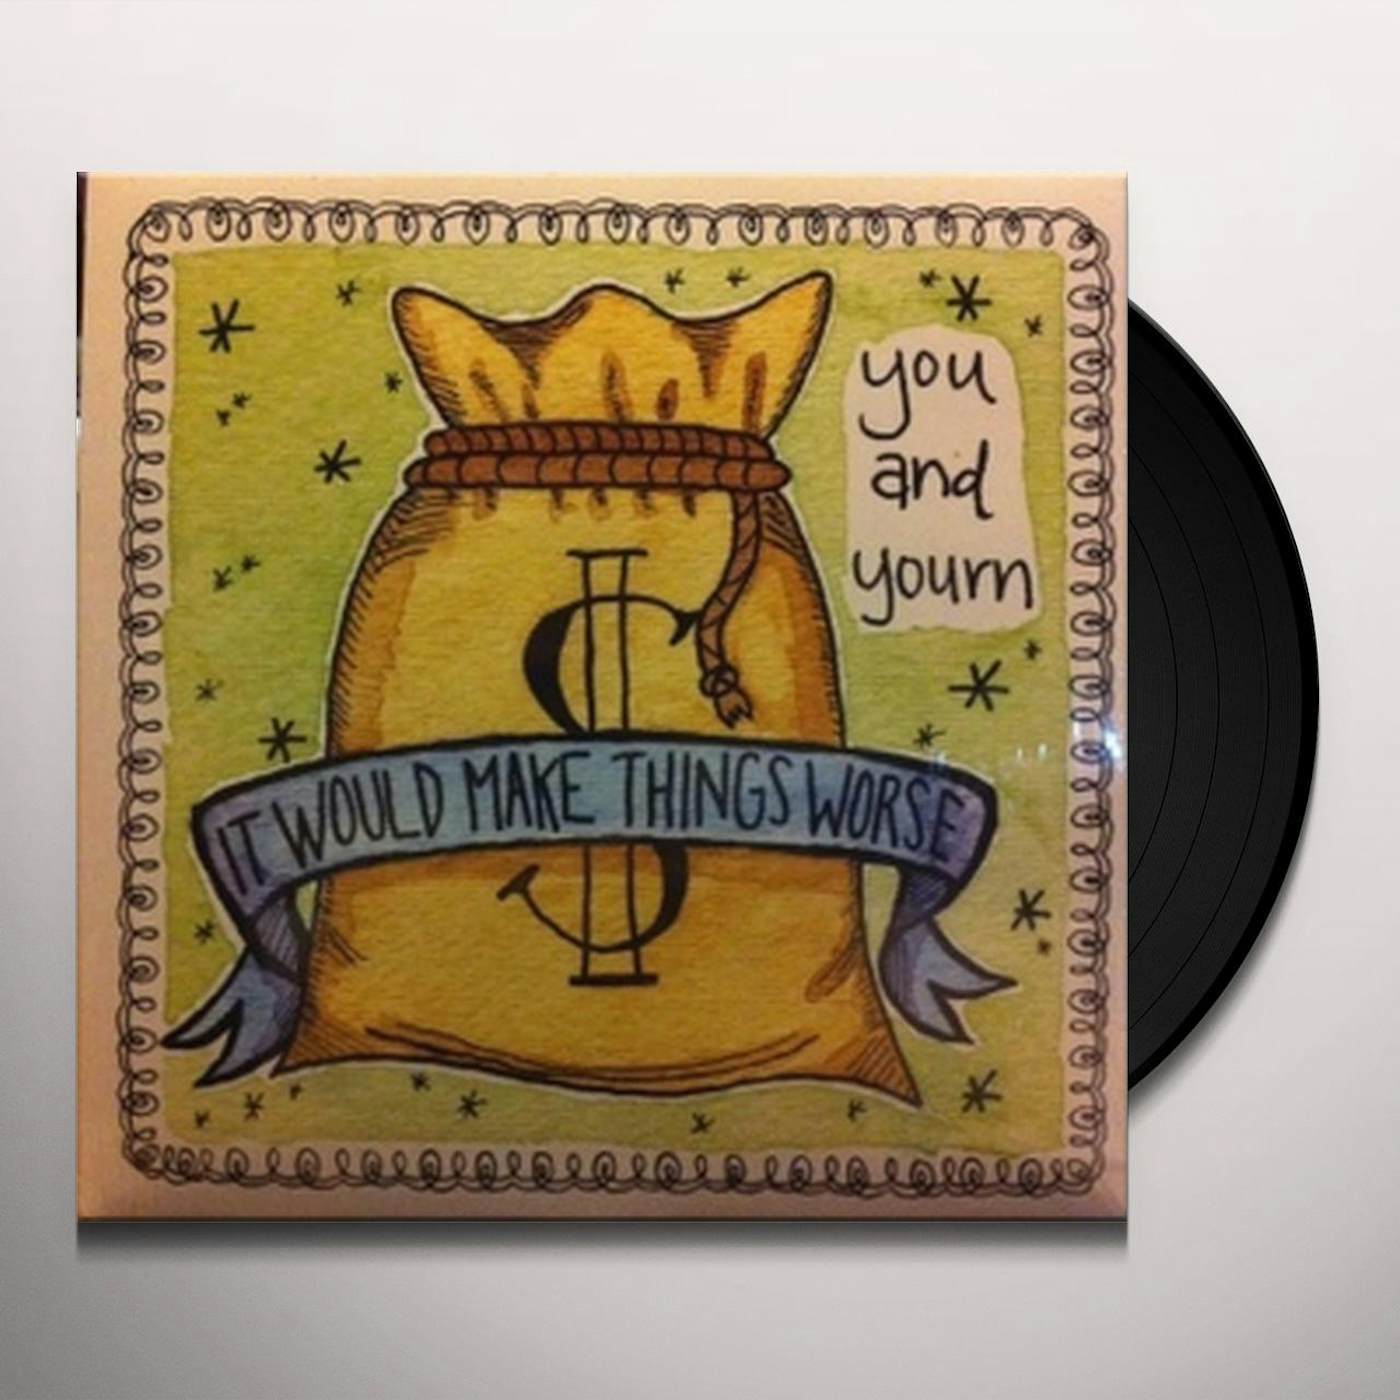 You & Yourn IT WOULD MAKE THINGS WORSE (Vinyl)